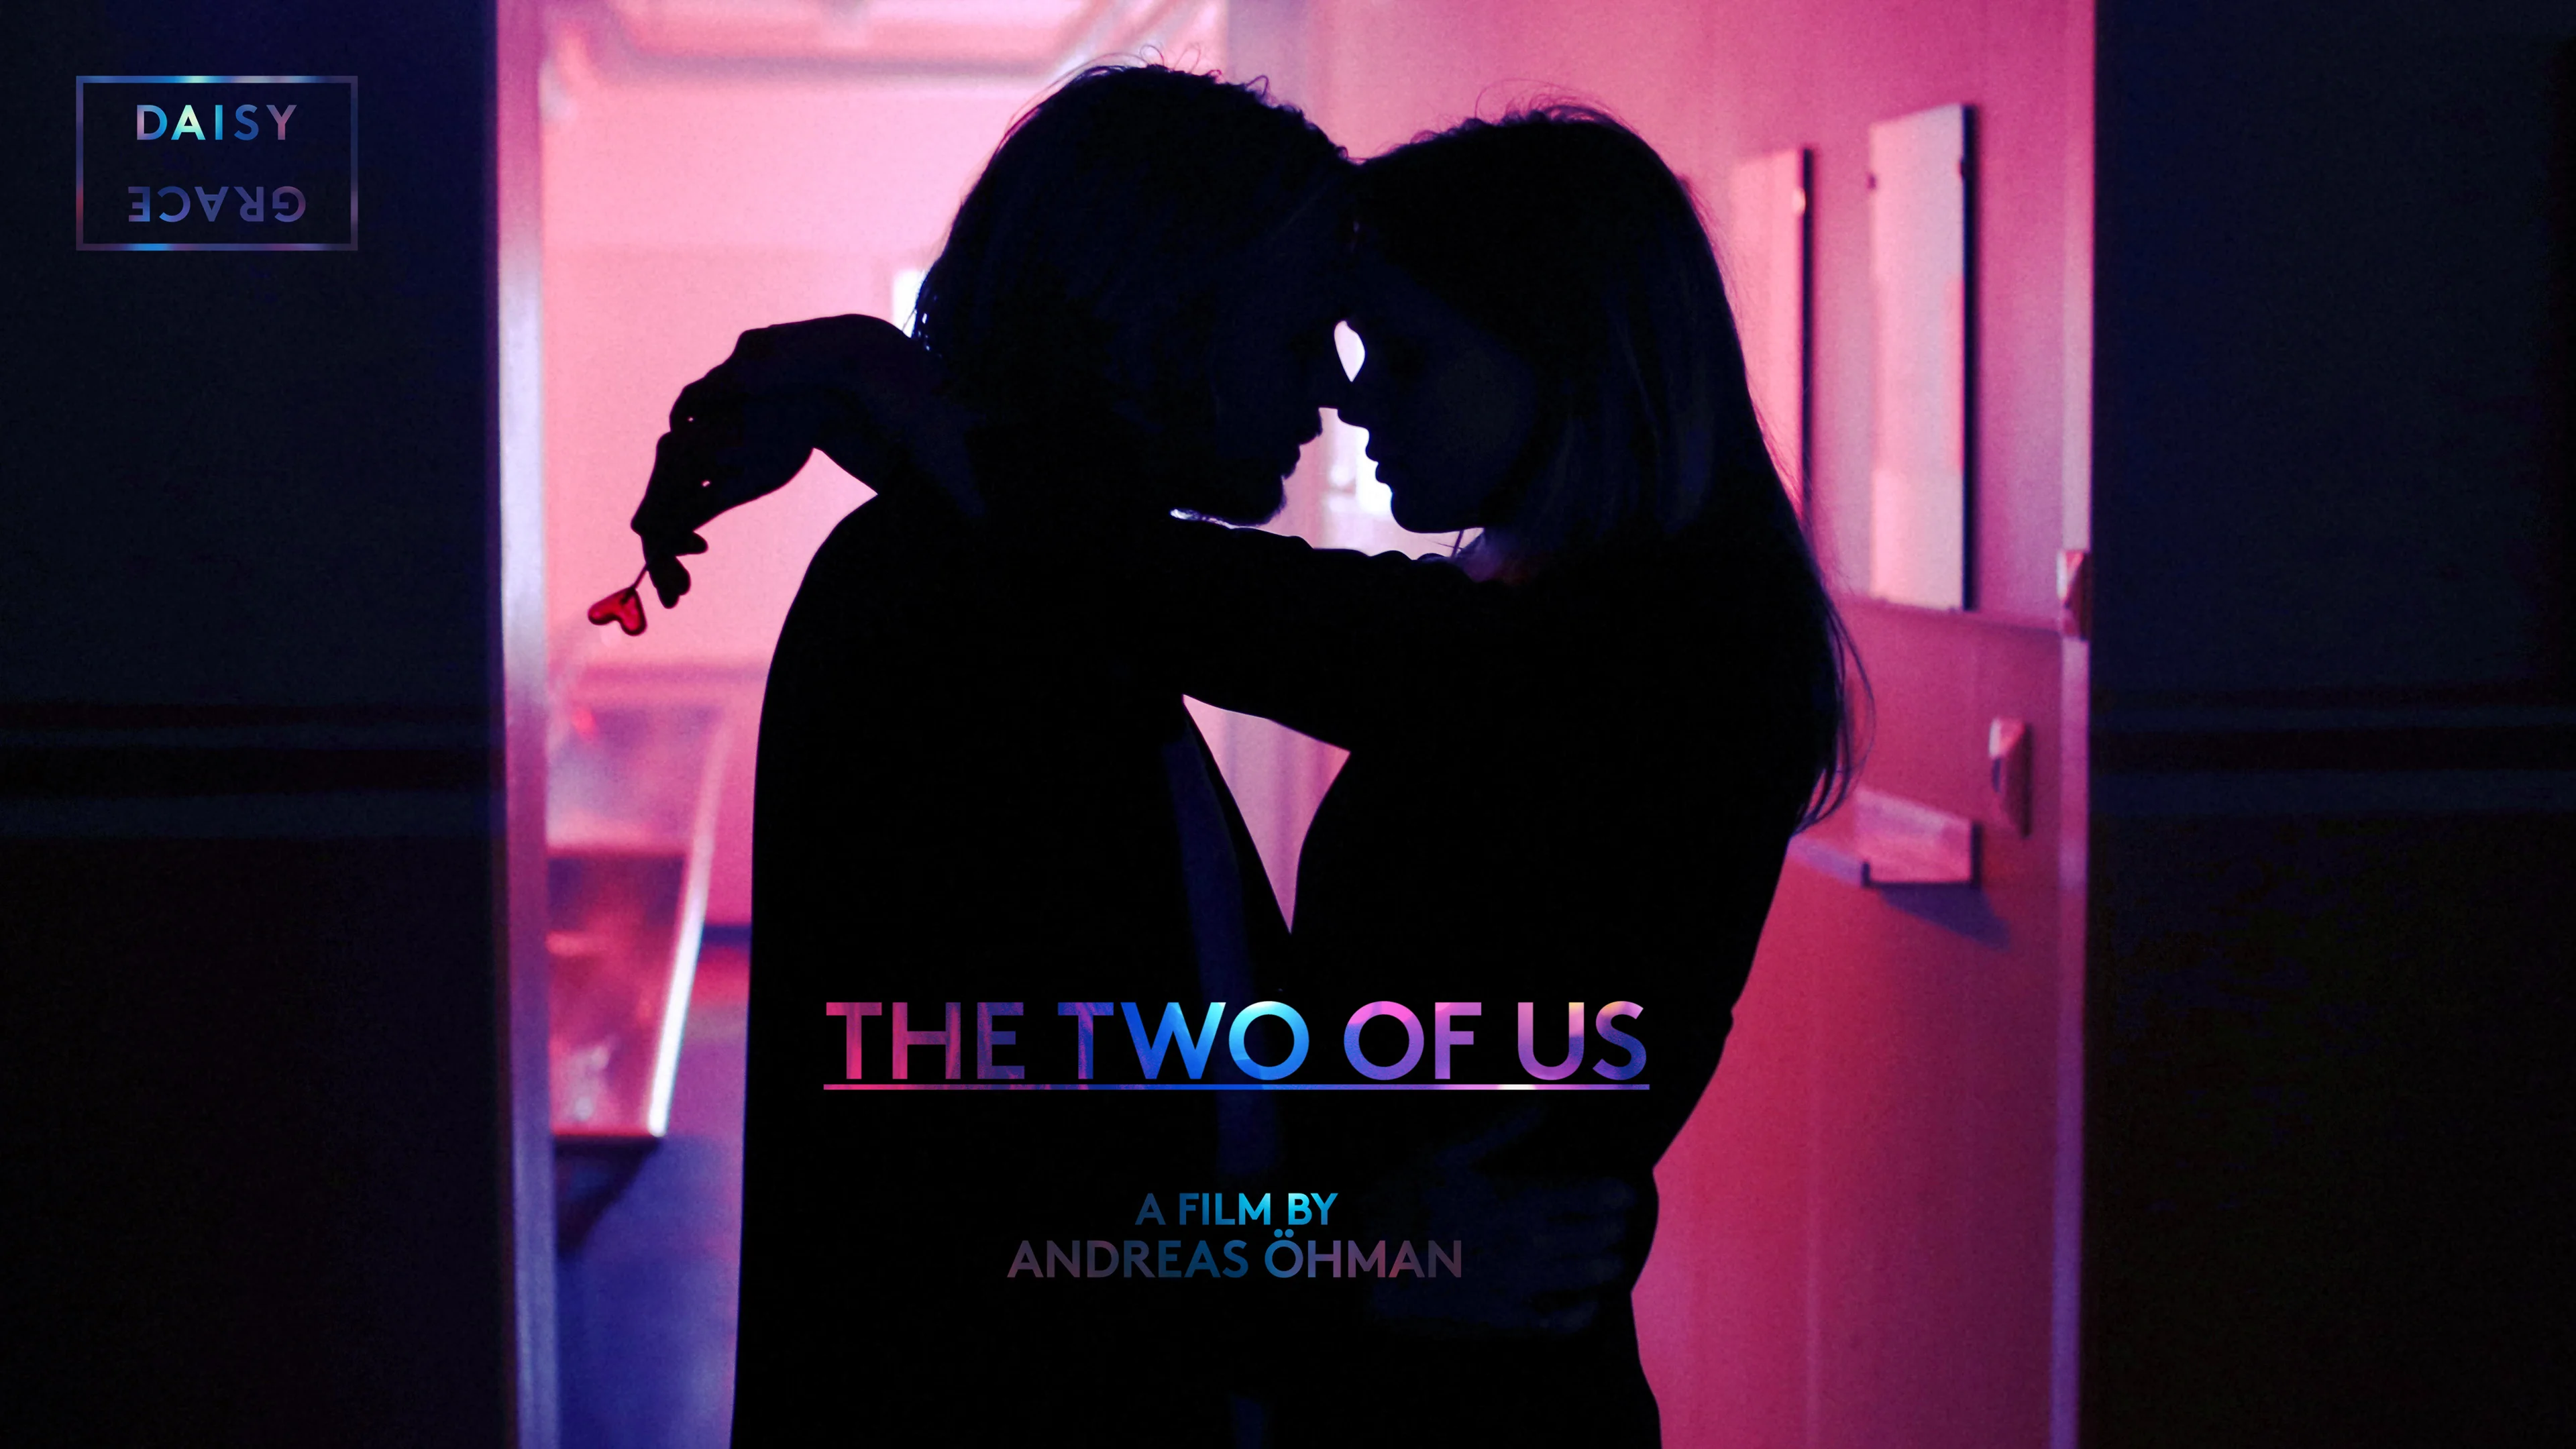 two of us movie